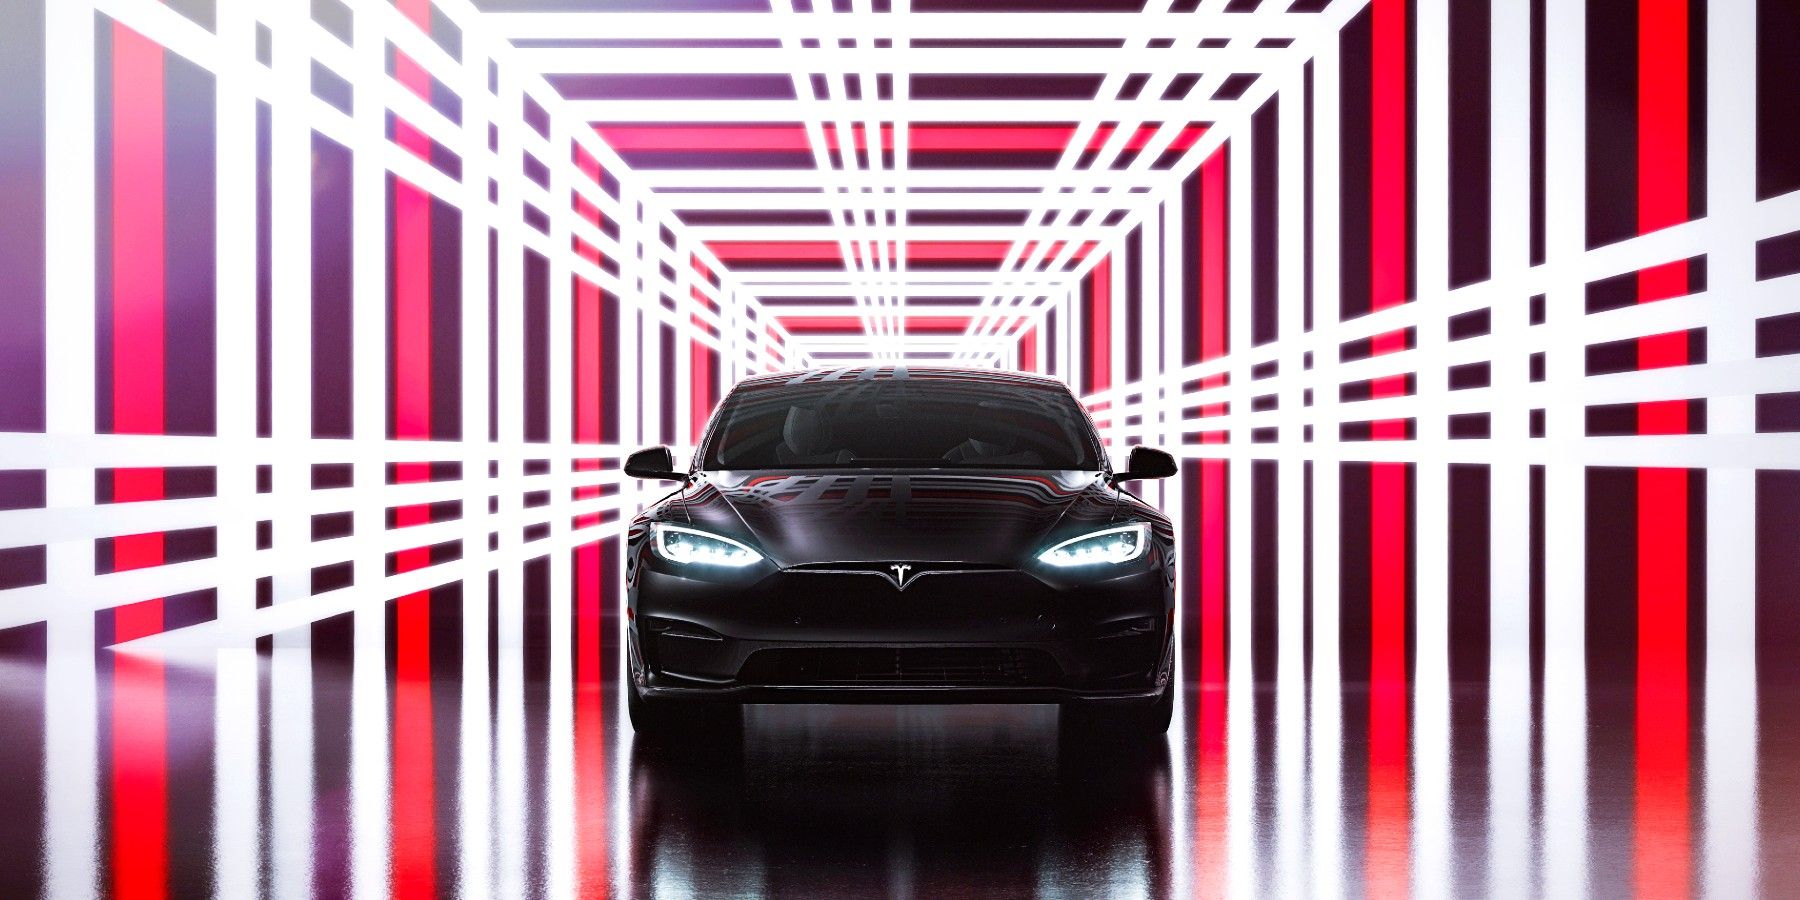 Over 11000 Teslas Just Got Recalled Because Of A Dangerous Software Bug